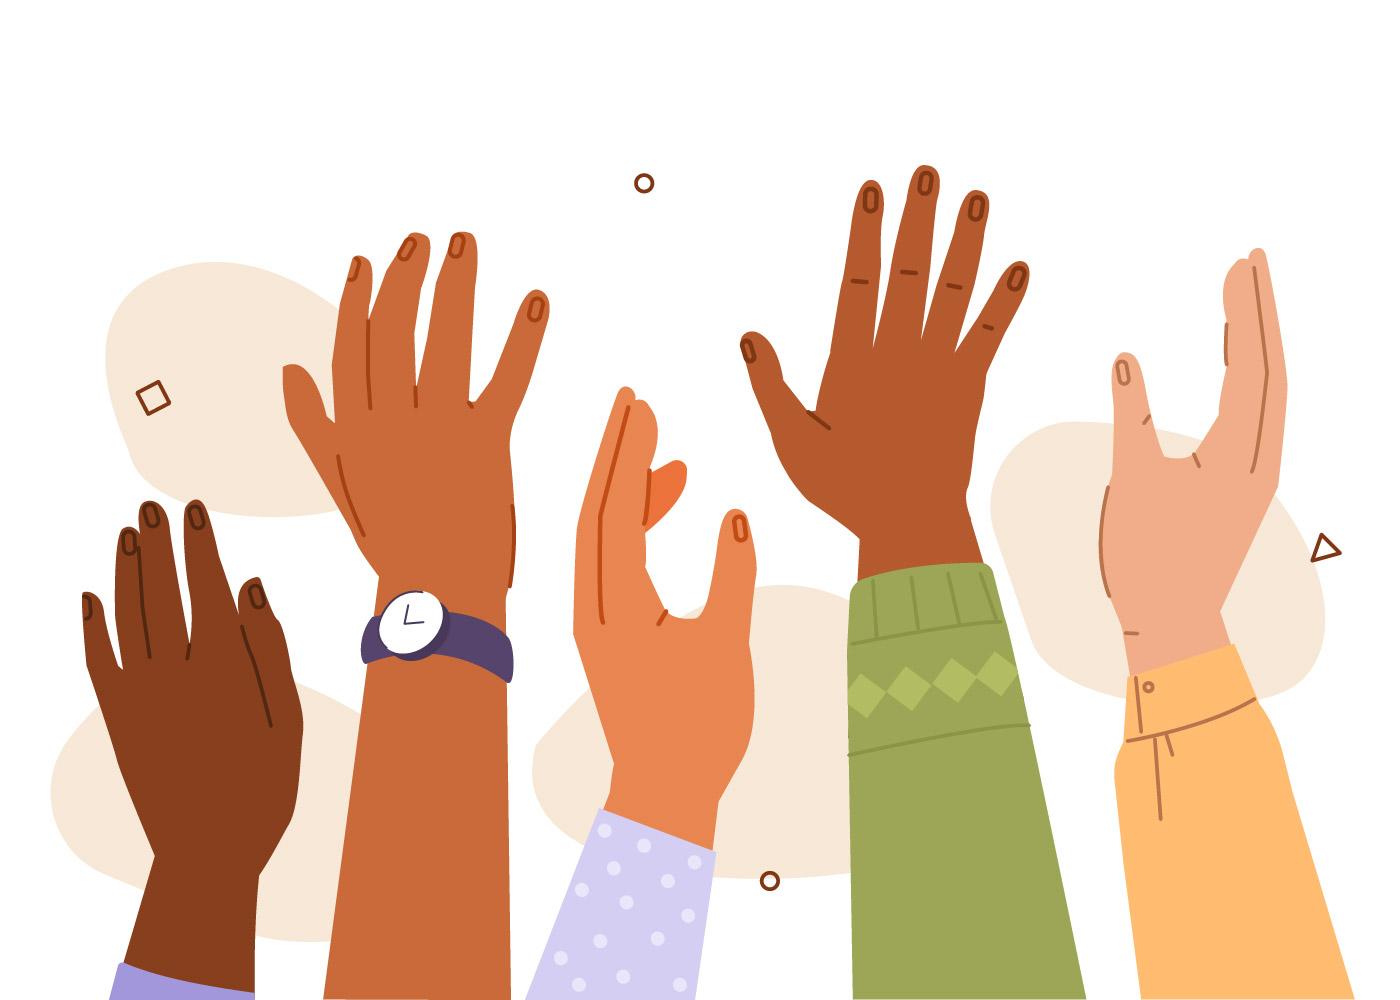 Illustration of hands raised with multiple skin tones.